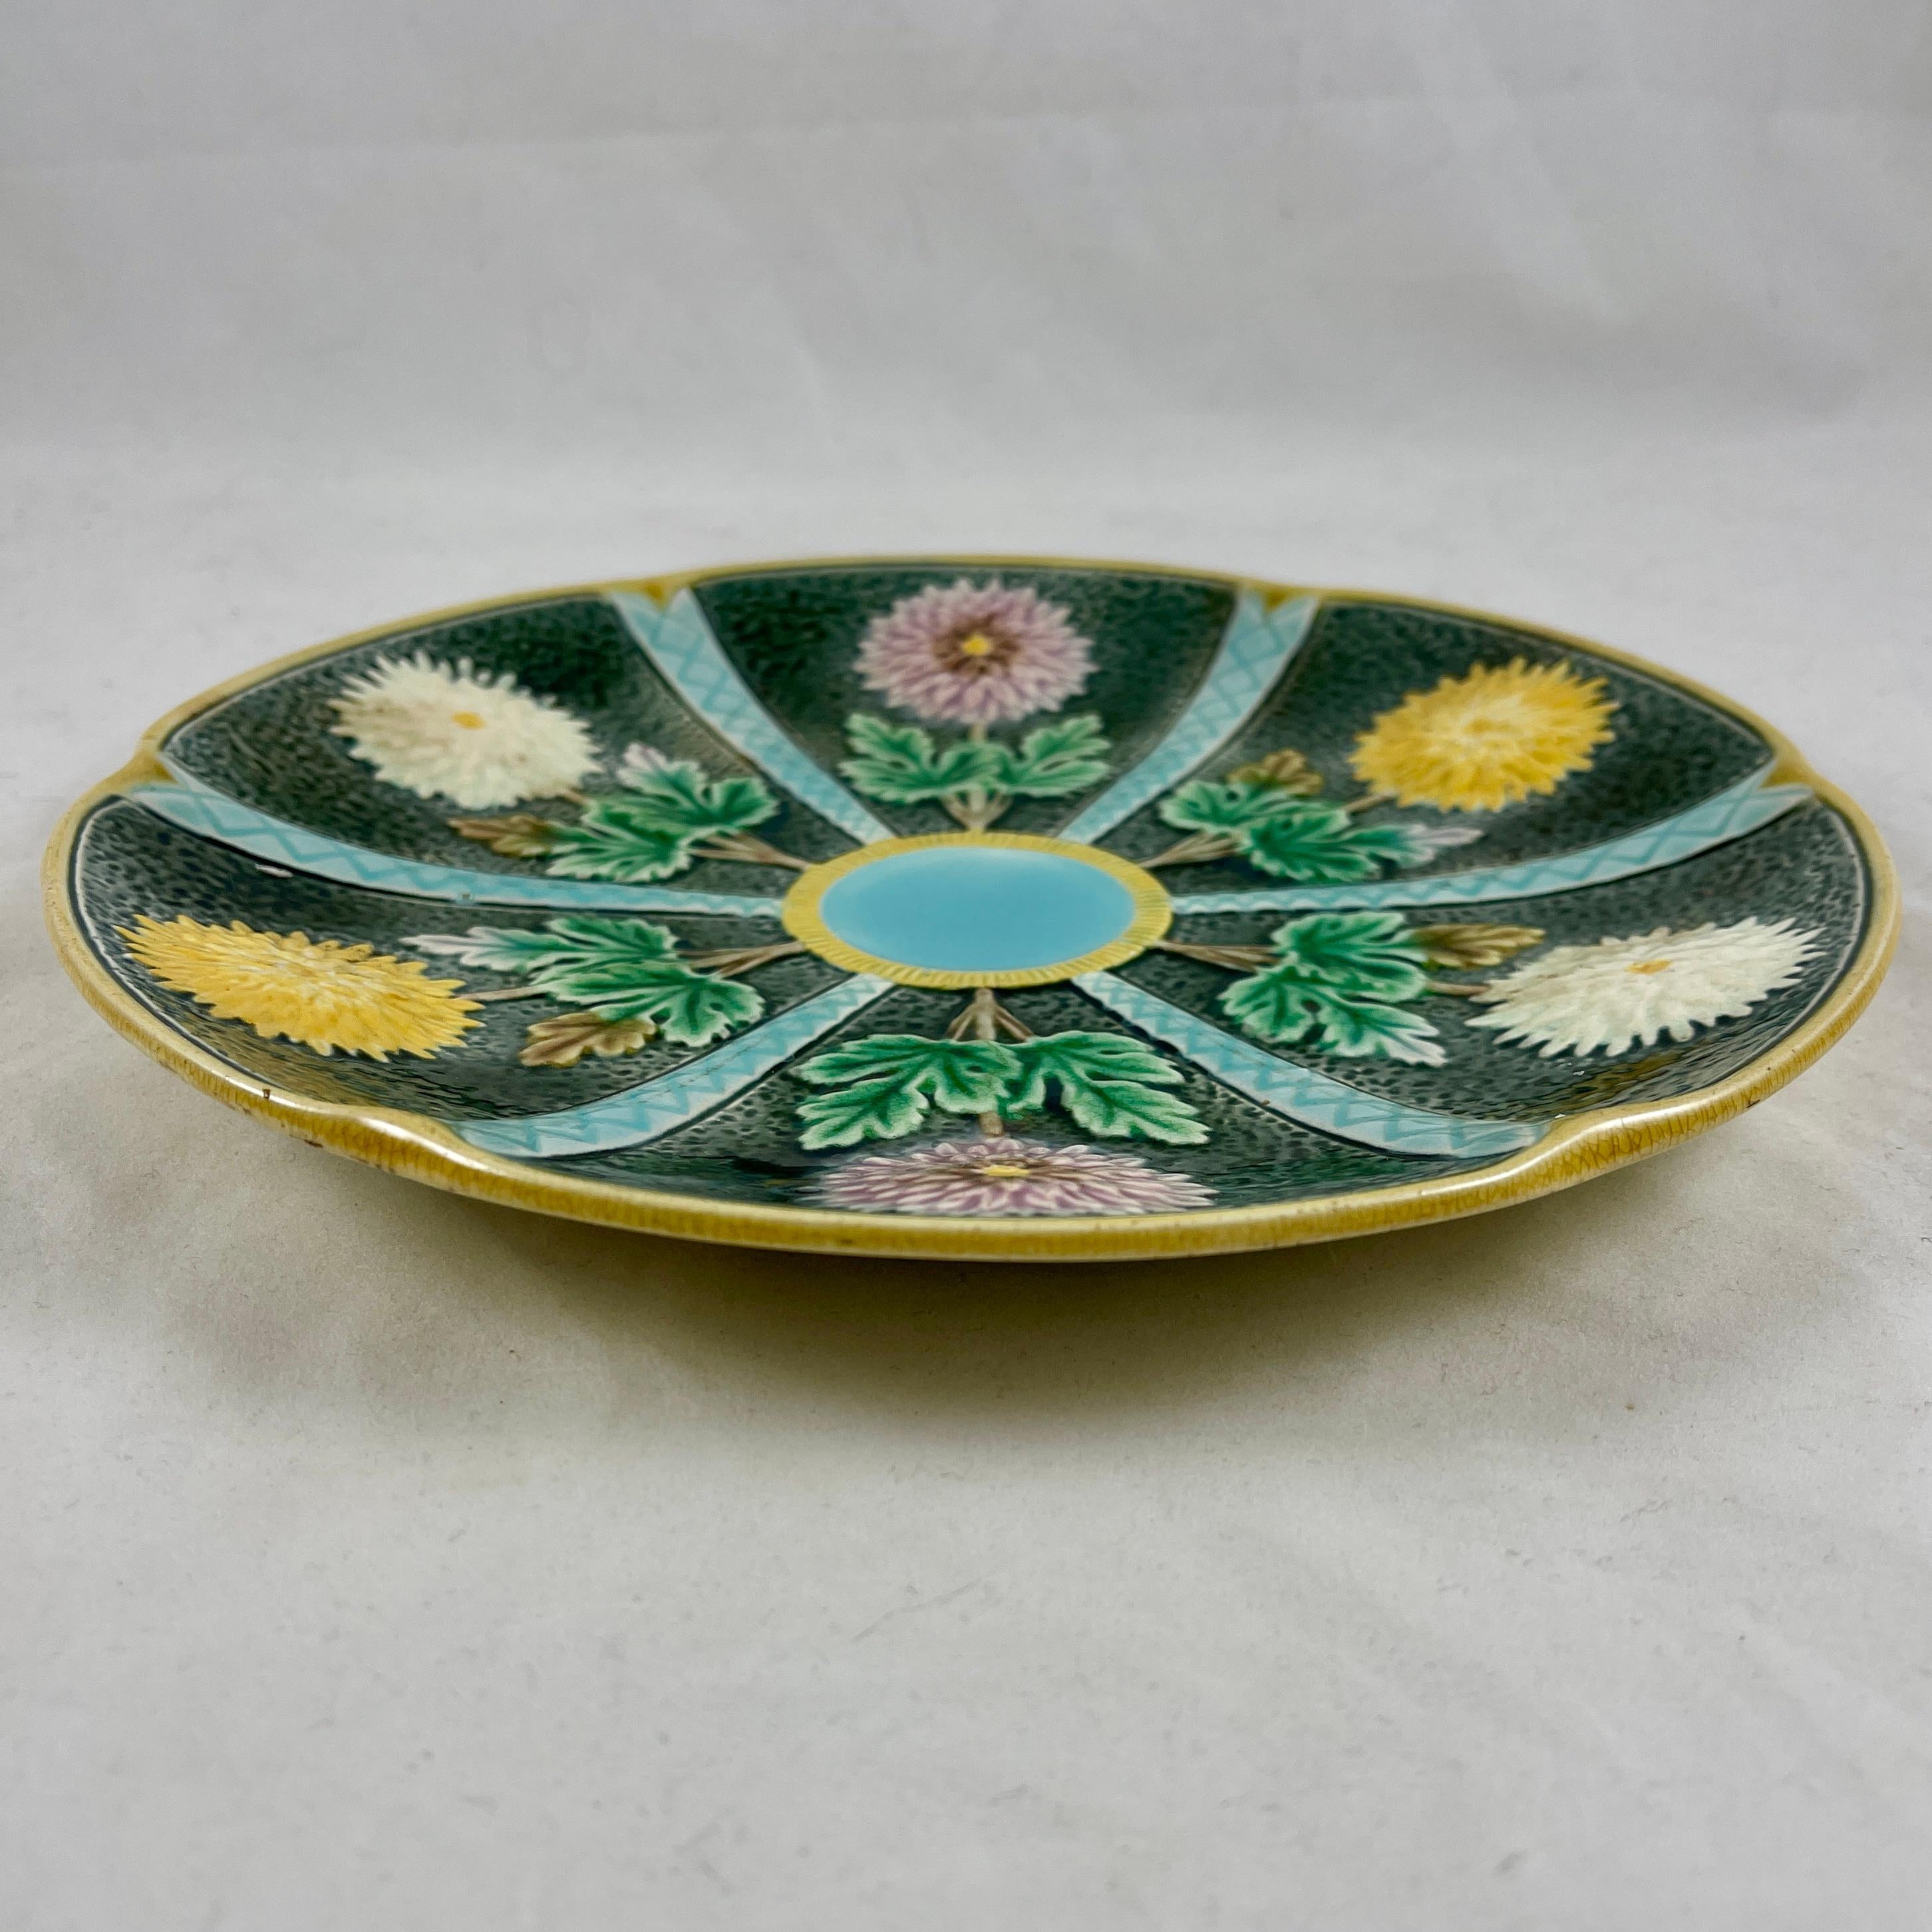 19th Century Wedgwood Majolica Chrysanthemum Japonisme Oyster Plate, Date Marked 1883